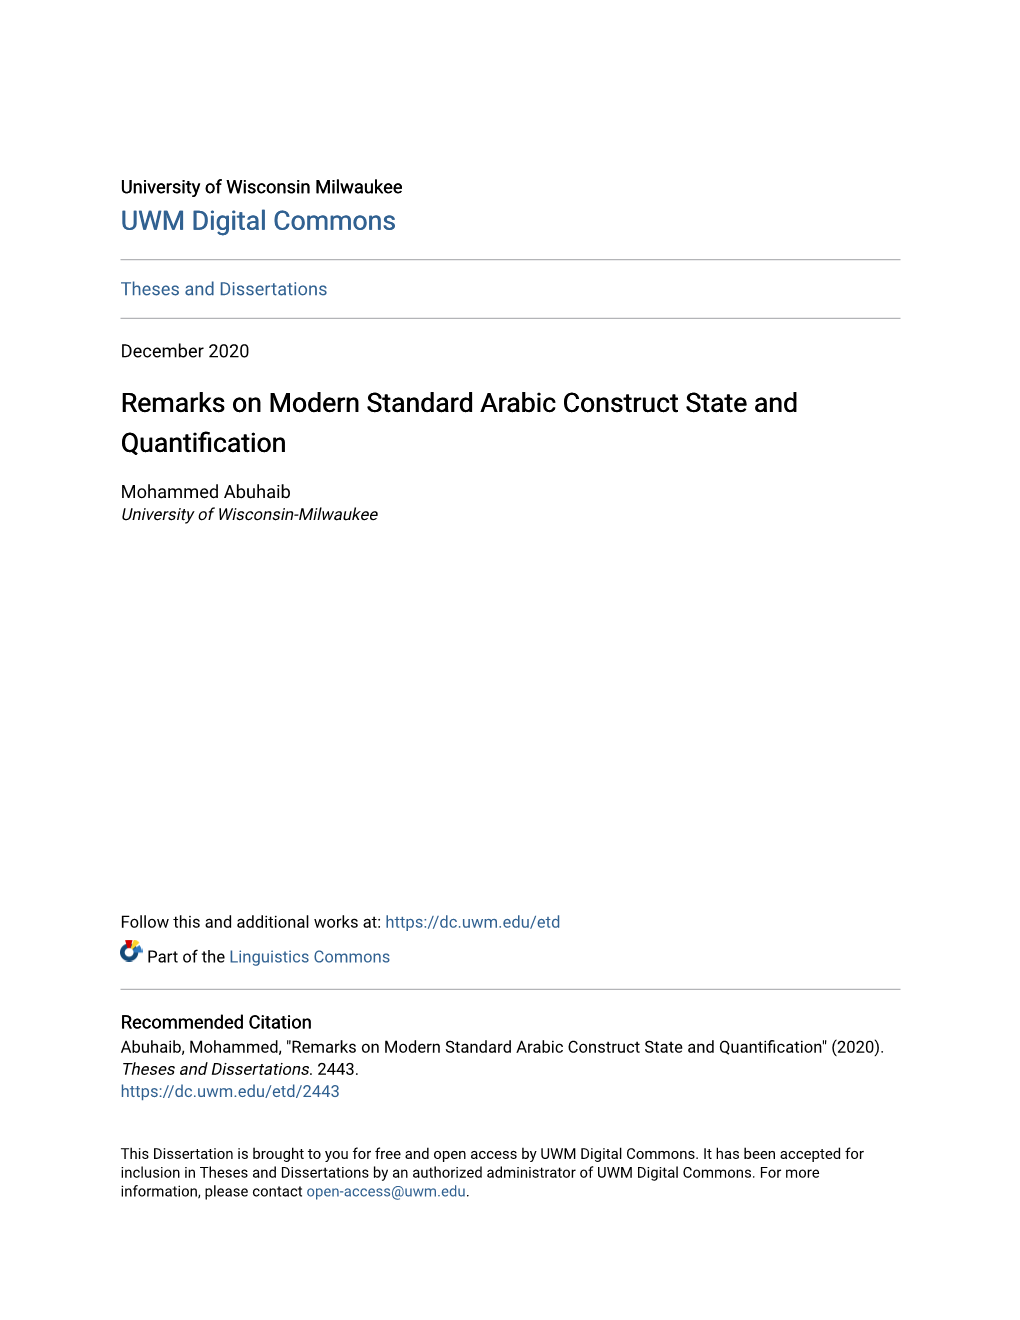 Remarks on Modern Standard Arabic Construct State and Quantification